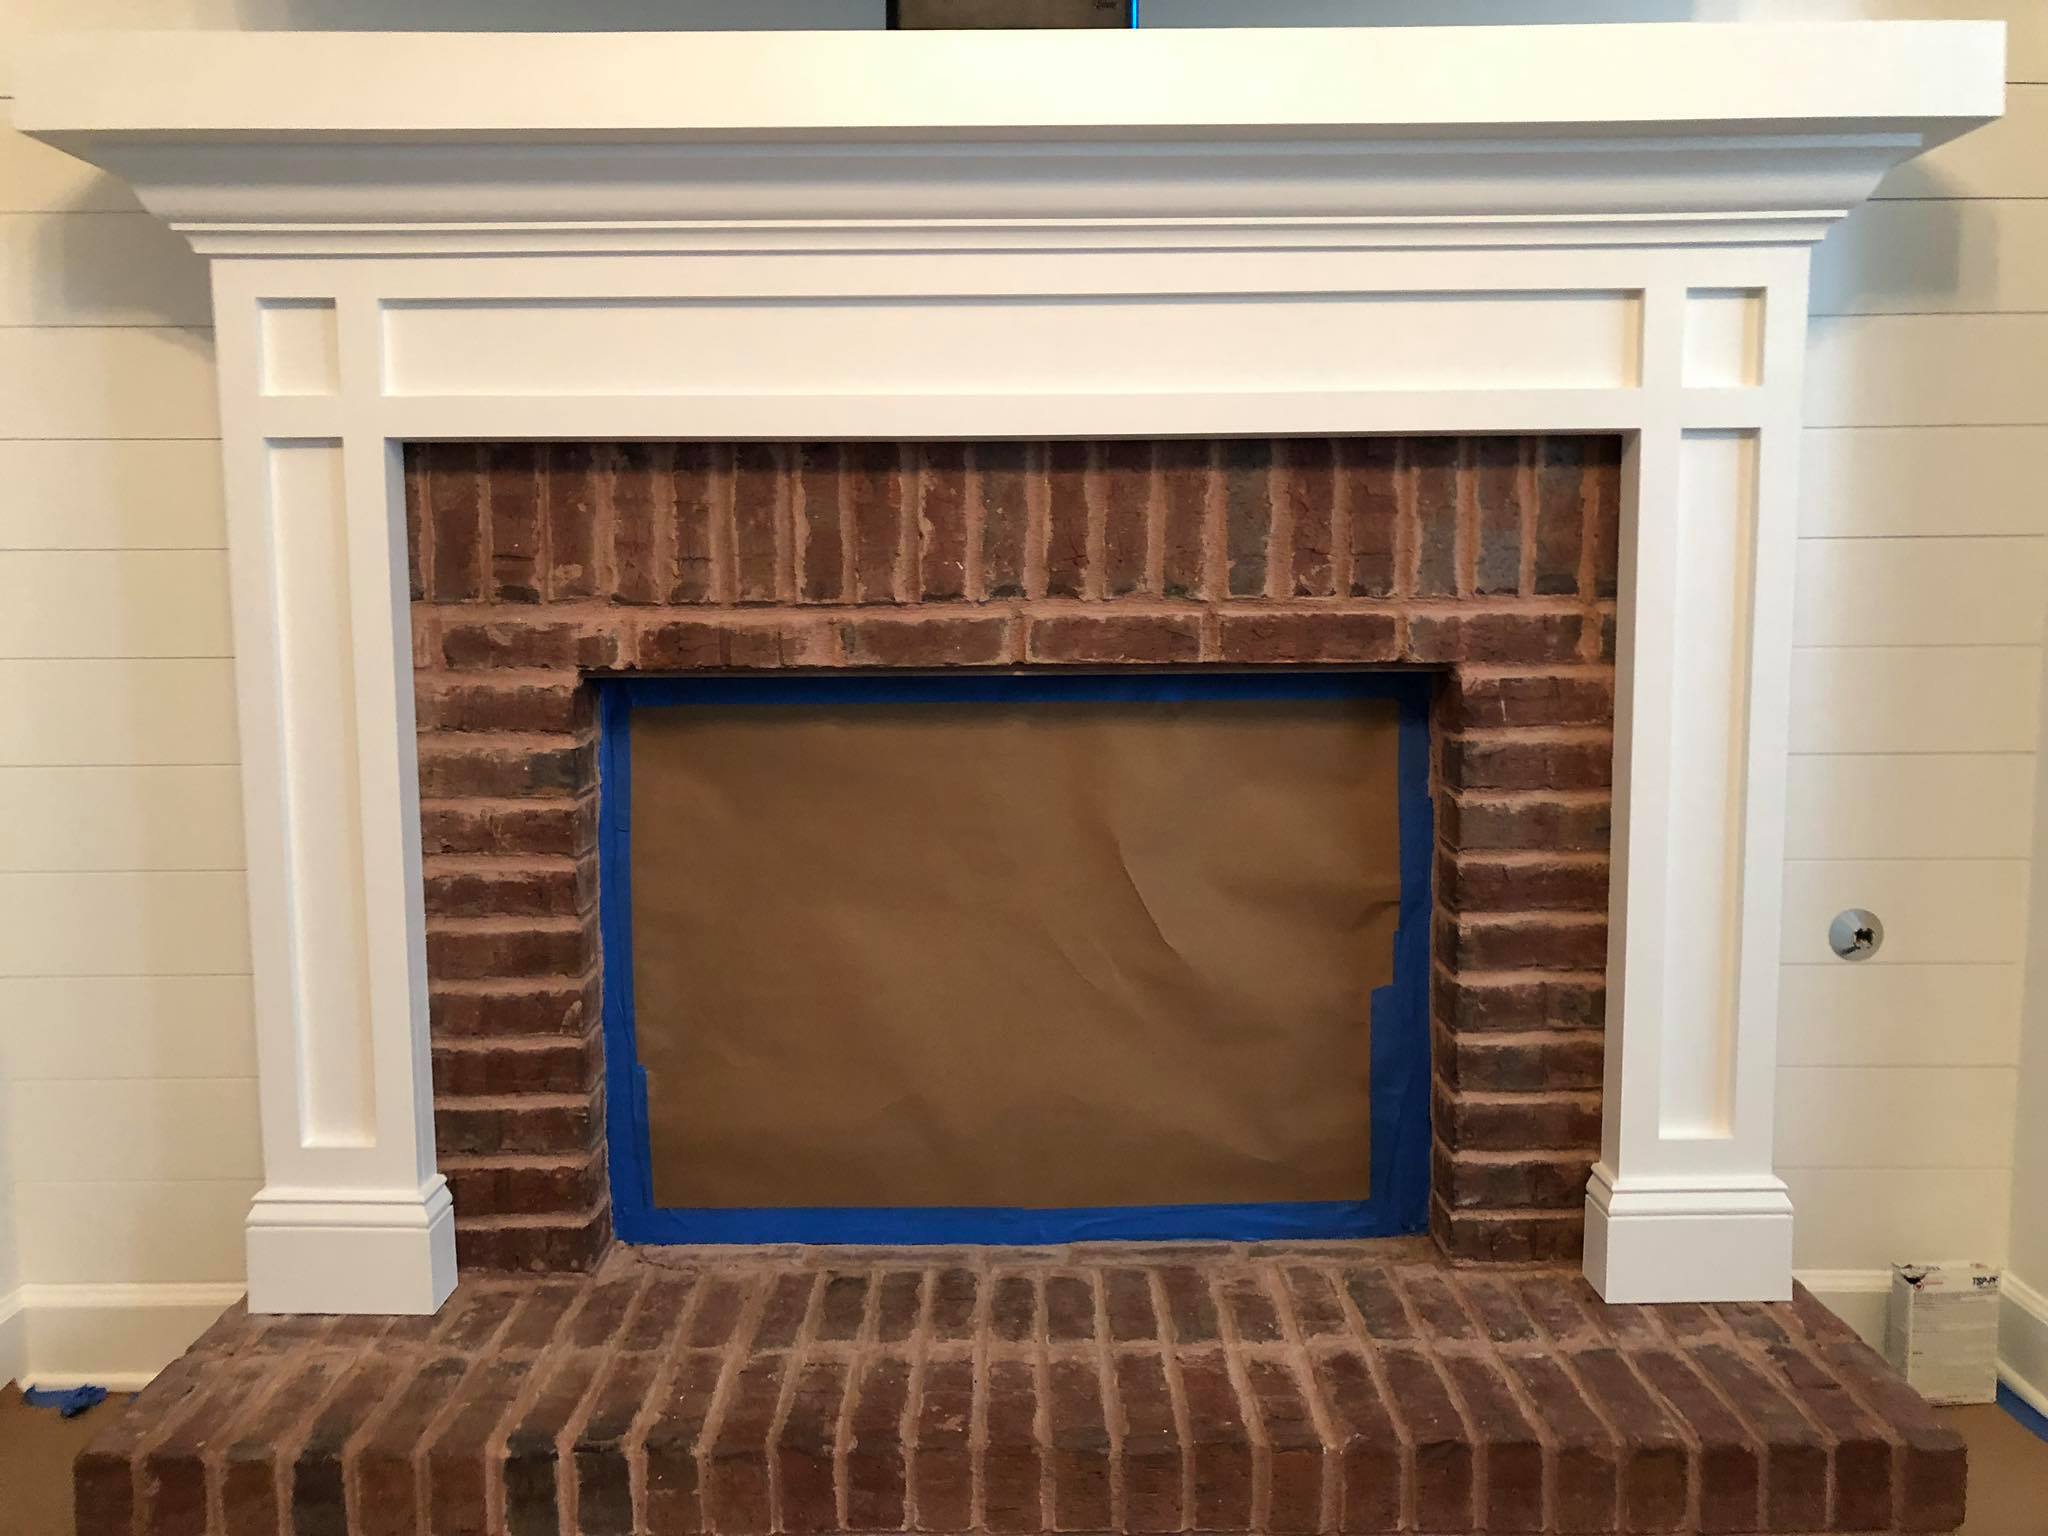 Fireplace Custom Wall High Built in Cabinets Shelves and Trim Painted White Installed 3